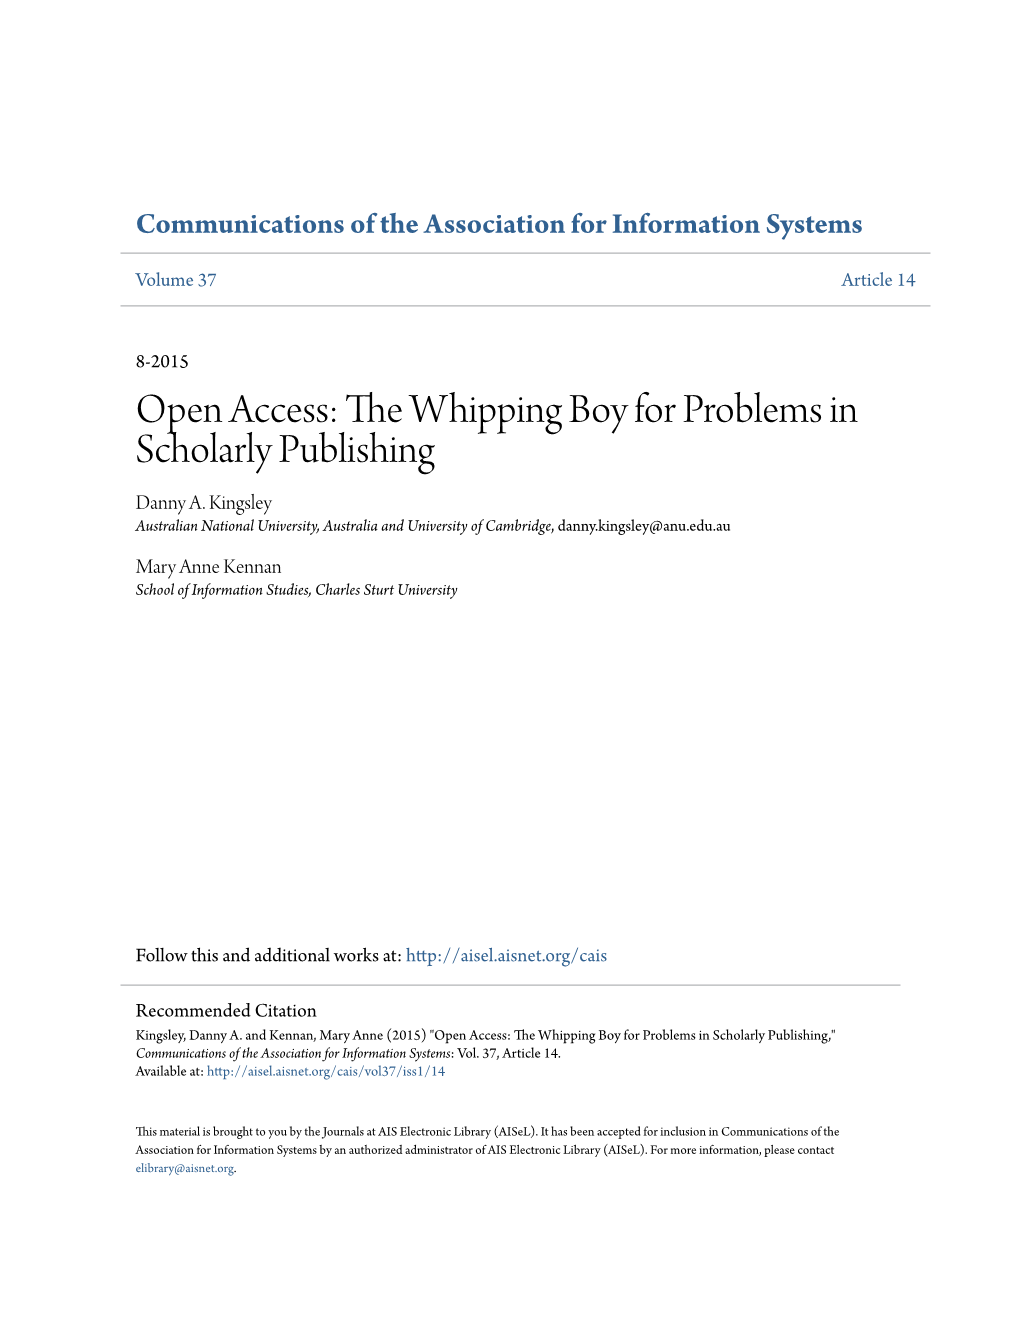 Open Access: the Whipping Boy for Problems in Scholarly Publishing Danny A